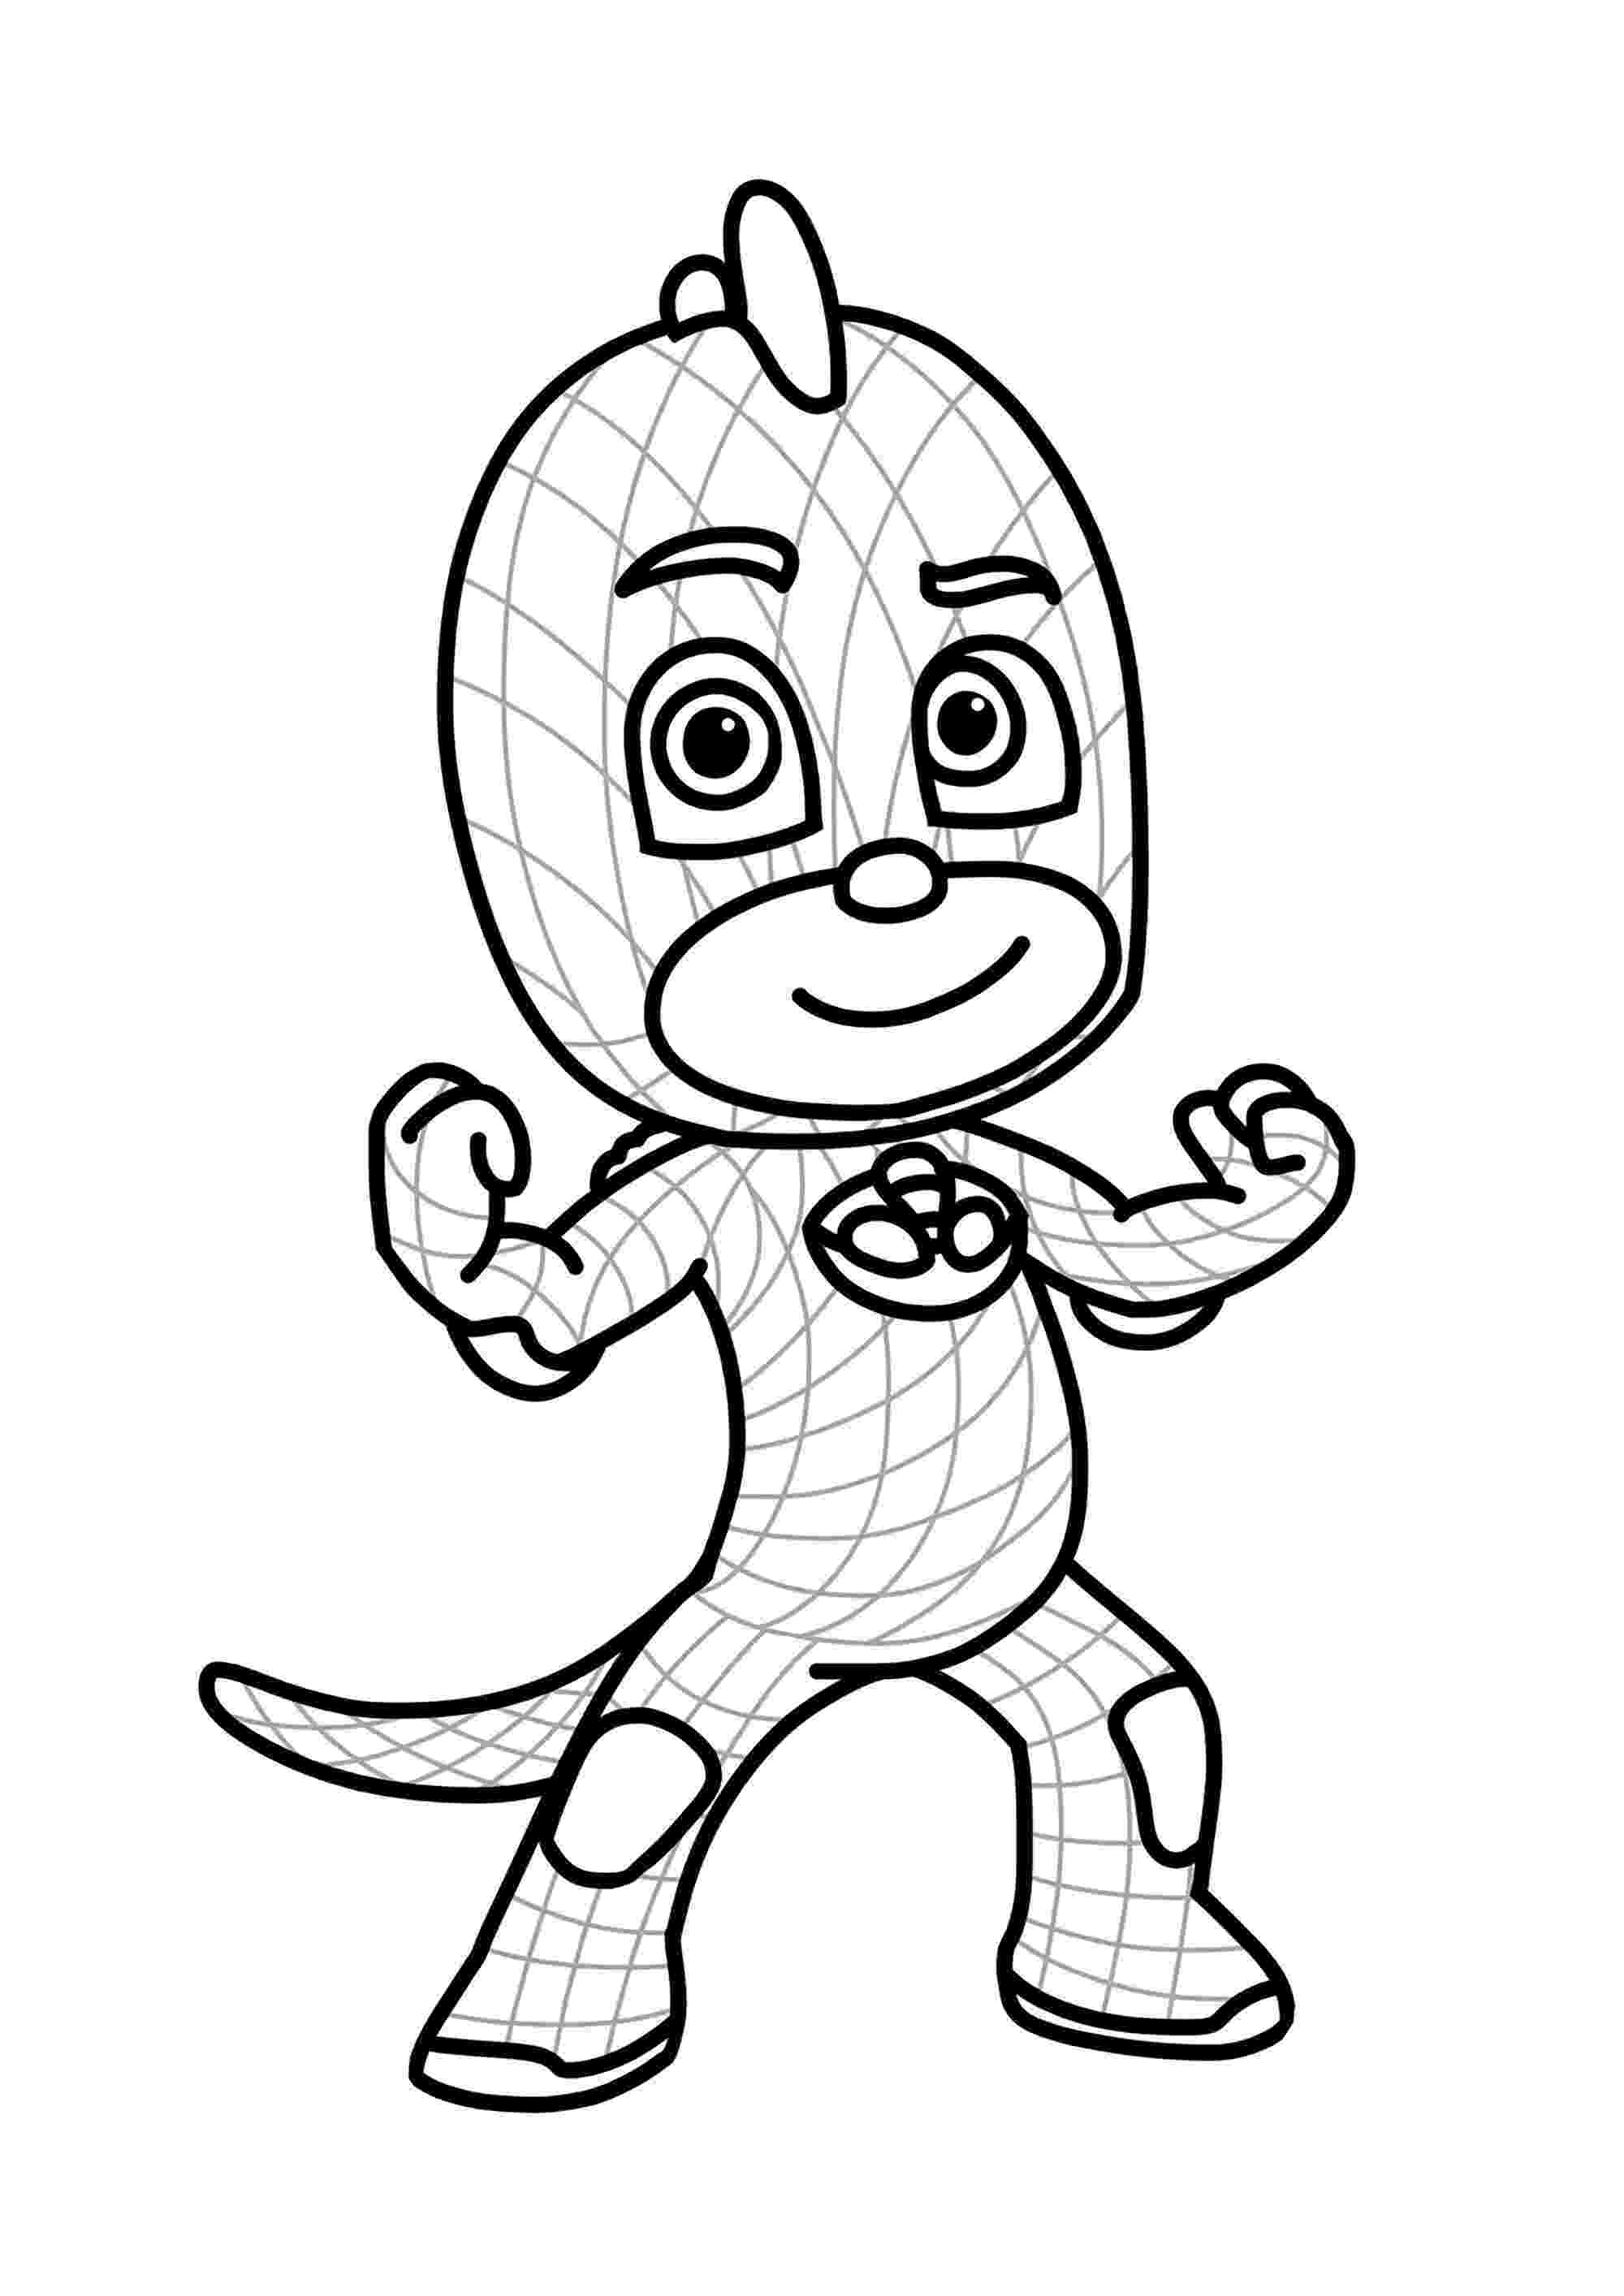 fun coloring pages for kids mandala coloring pages for kids to download and print for free pages kids coloring fun for 